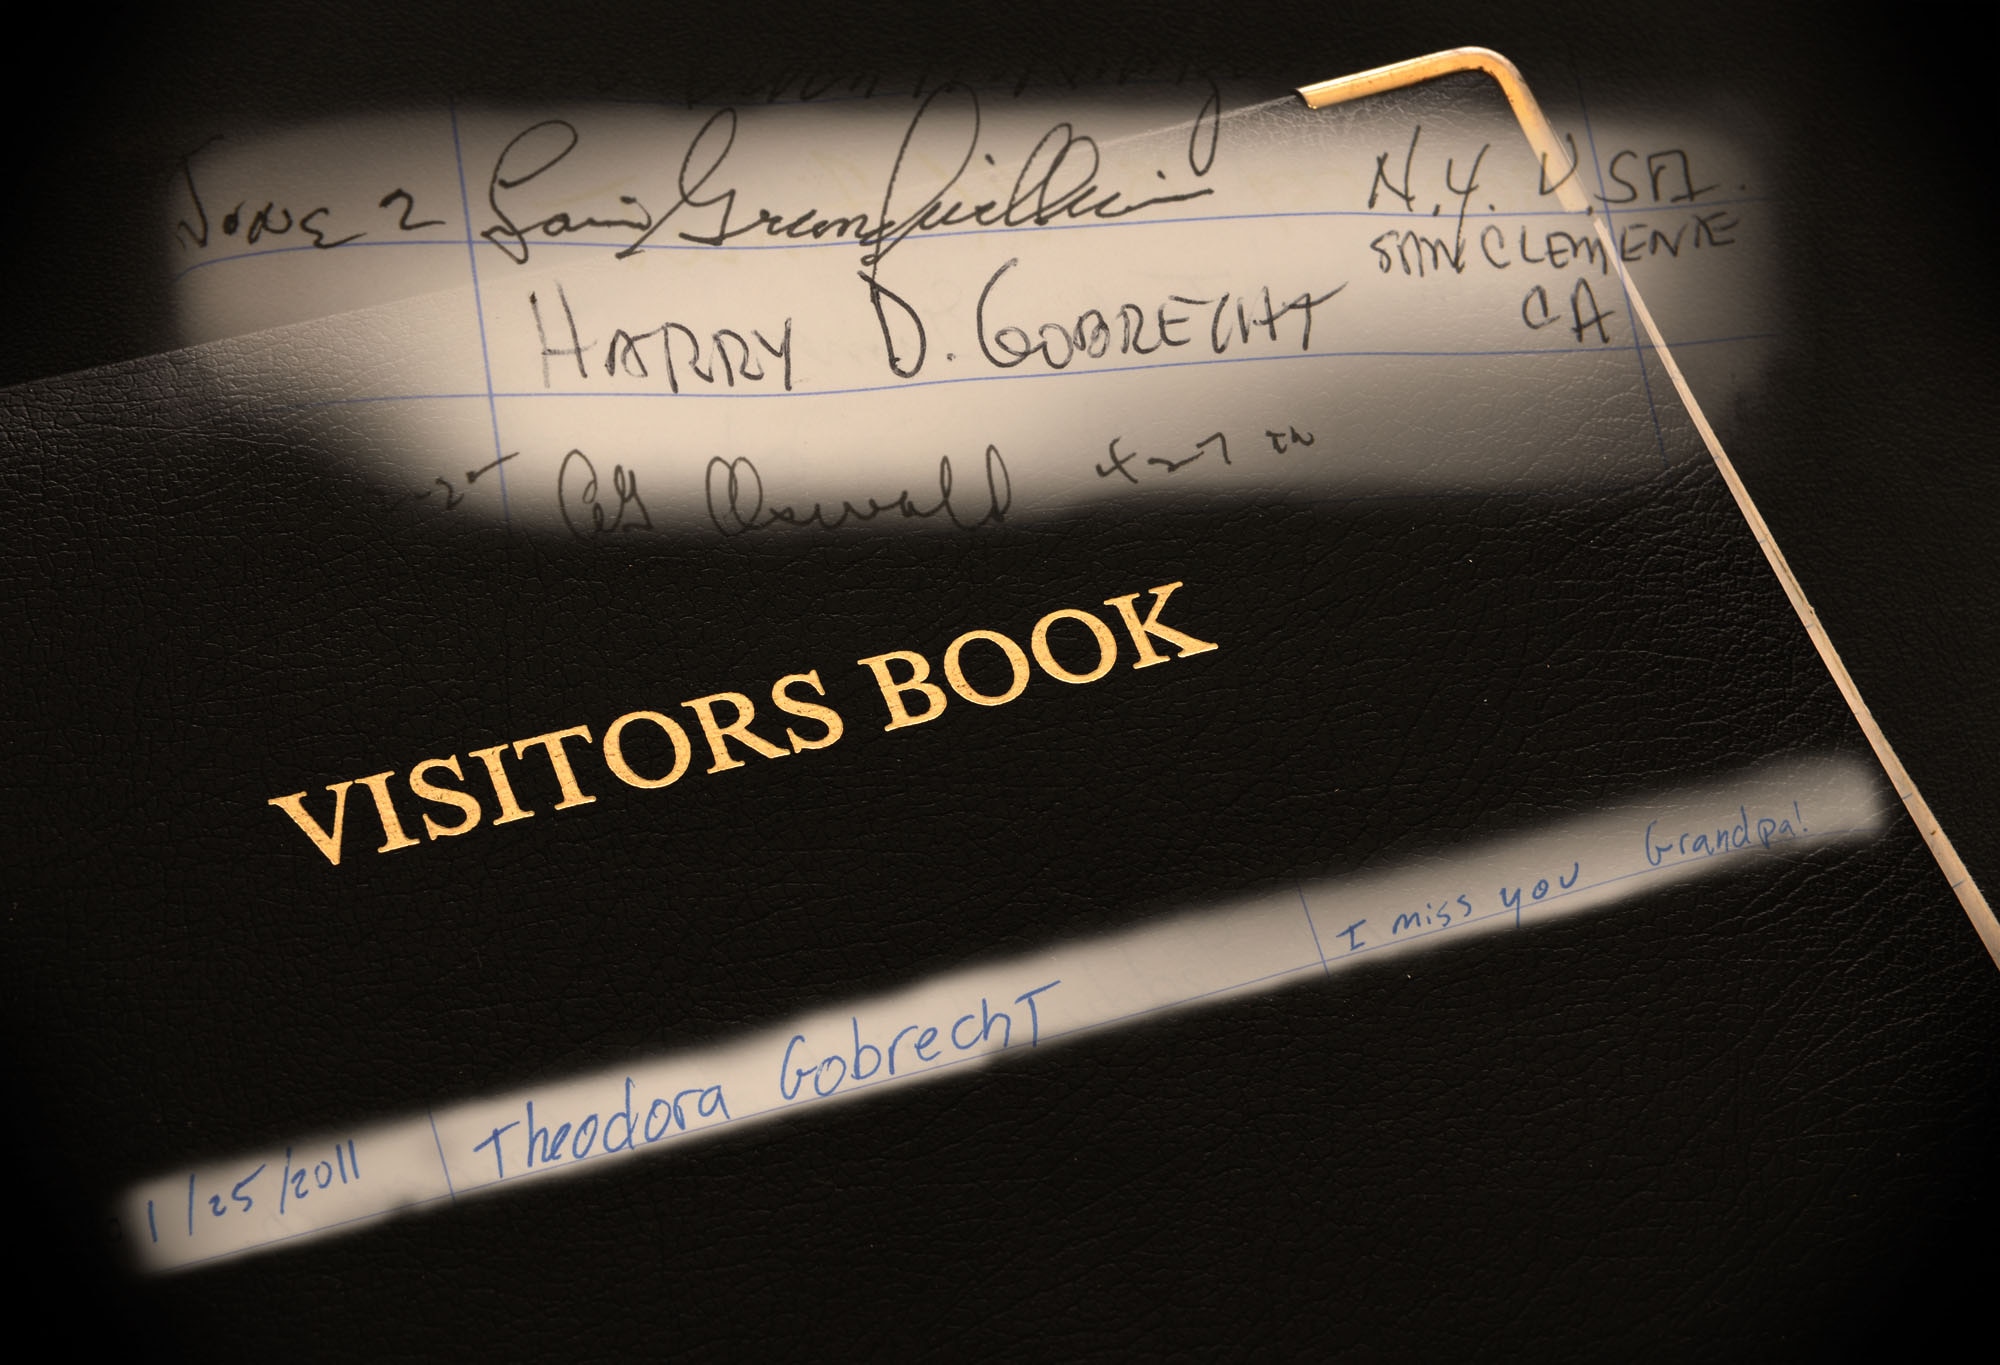 "I miss you grandpa!." Ms. Theodora “Teddi” Gobrecht signed the same visitor book at the 303rd Bomb Group (Heavy) Memorial at RAF Molesworth on January 25th 2011 that her grandfather Lt Col Harry D. Gobrecht (Ret) signed during the June 2, 2000 dedication of the memorial. )U.S. Air Force photo by Staff Sgt. Javier Cruz)